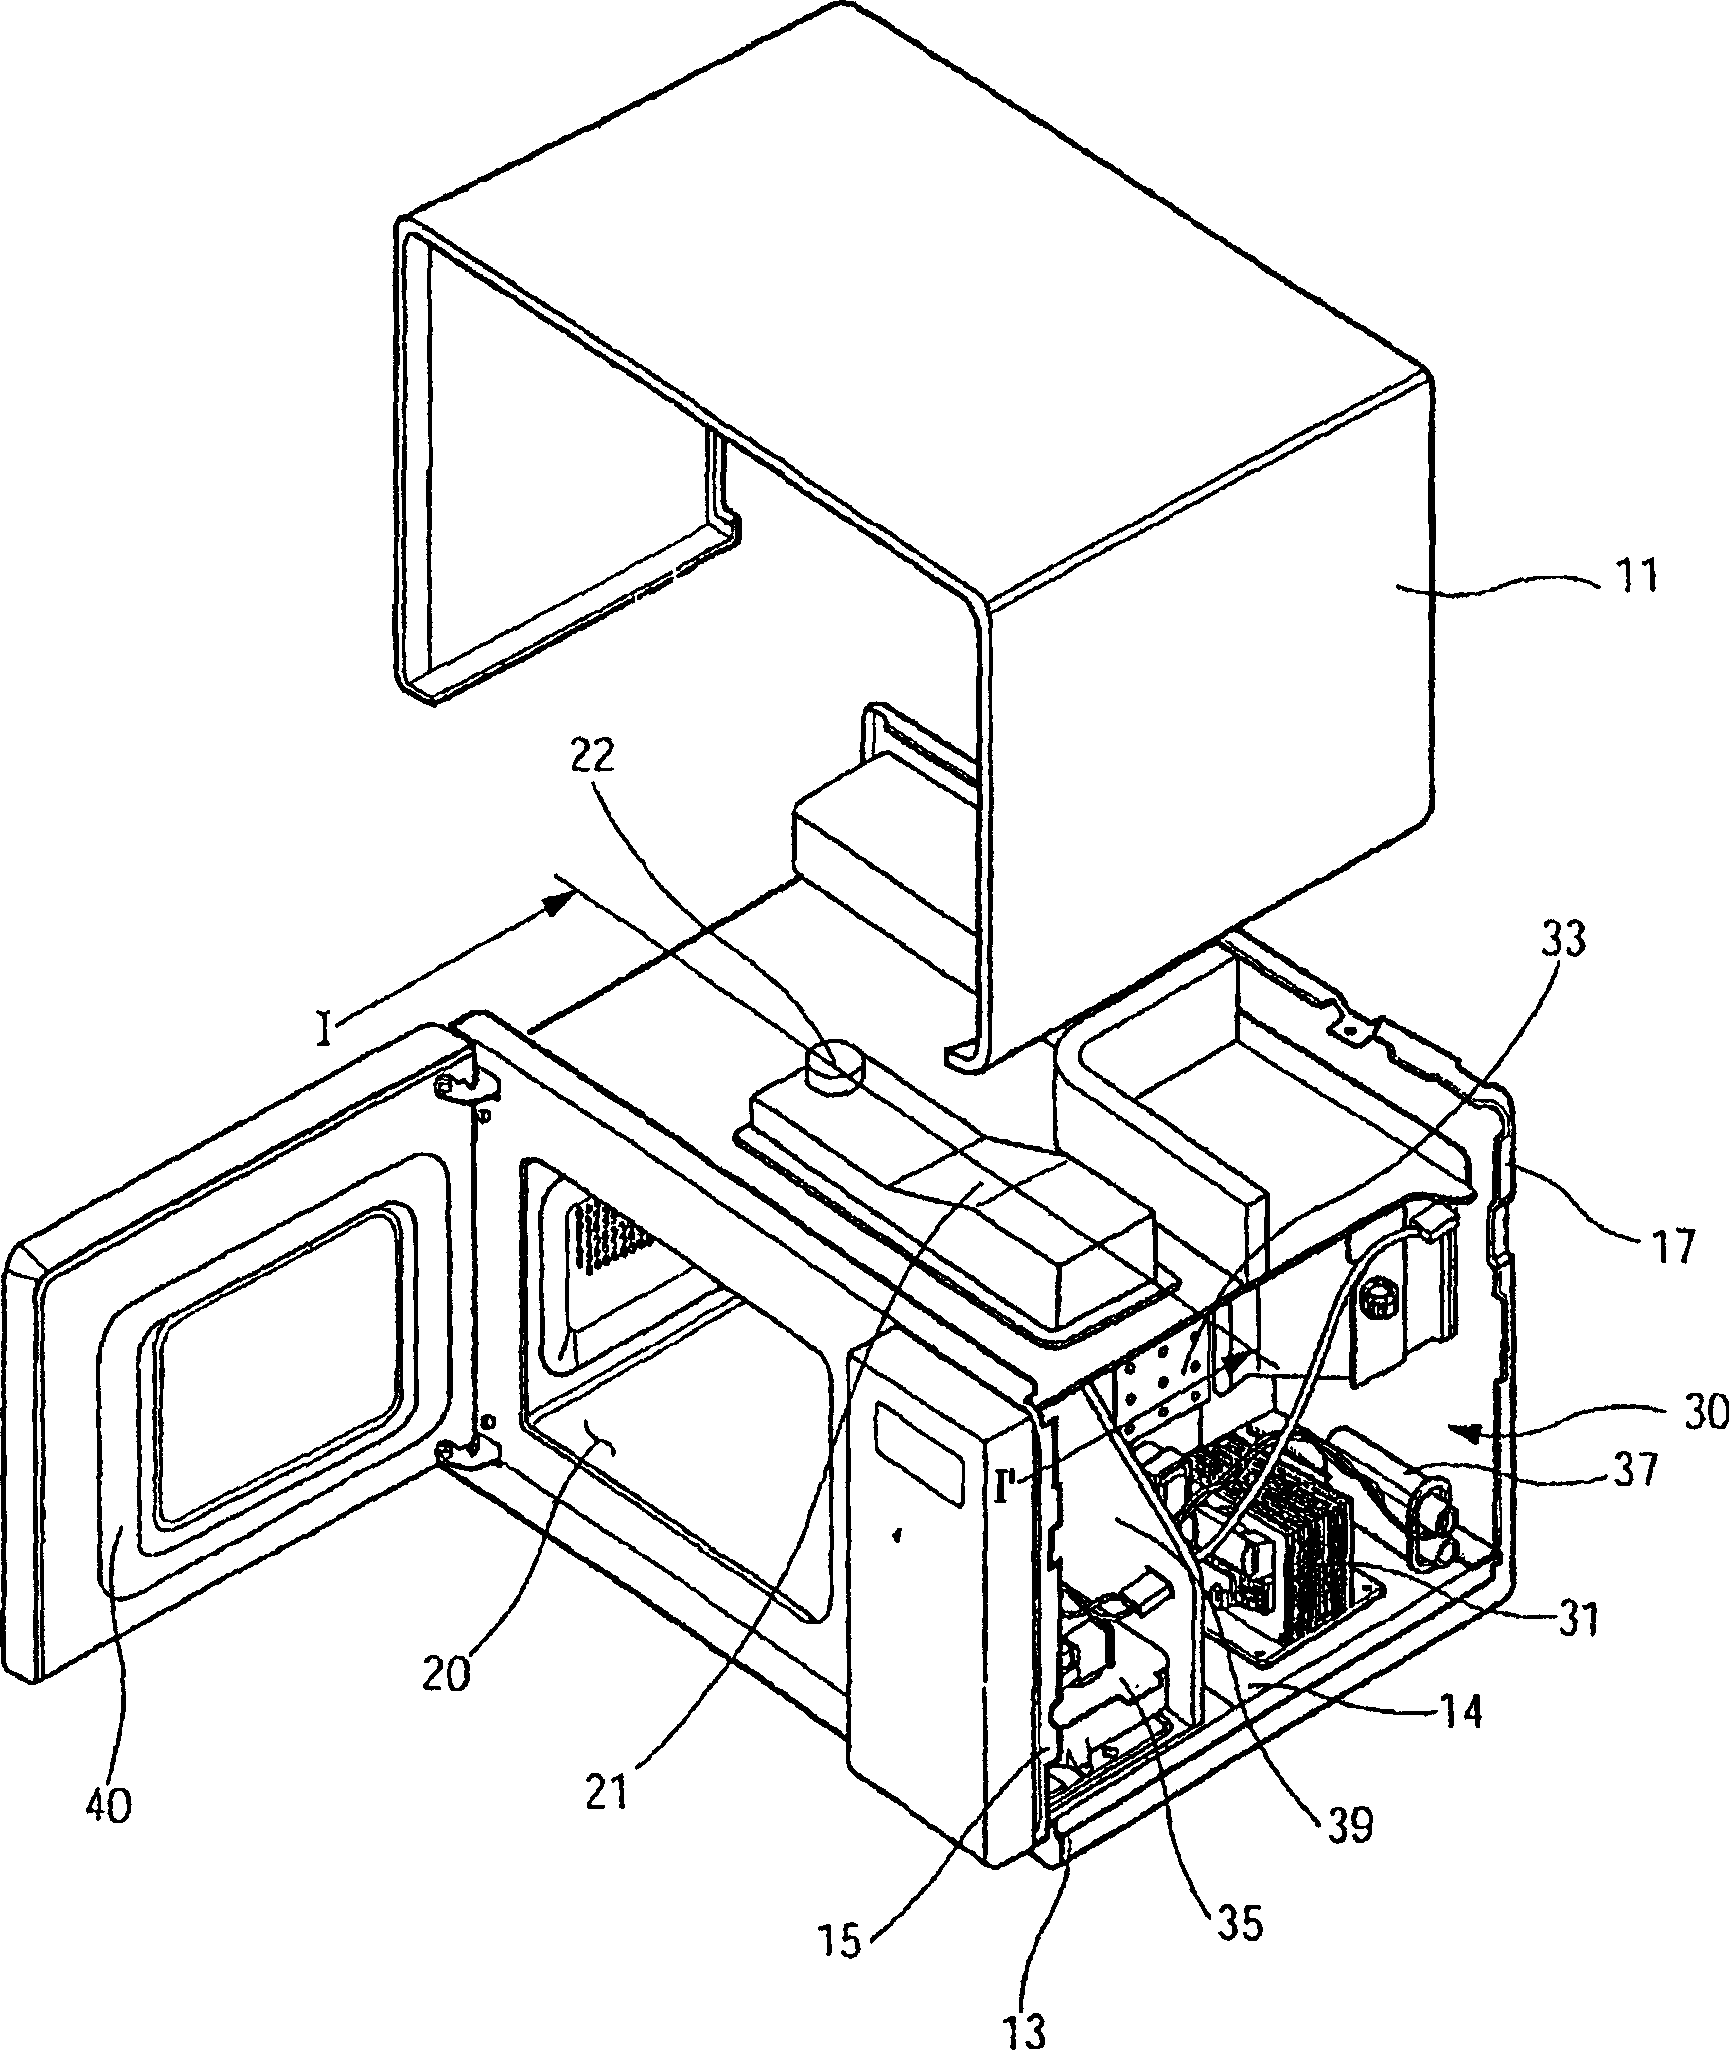 Microwave oven and radiating structure of microwave in microwave oven